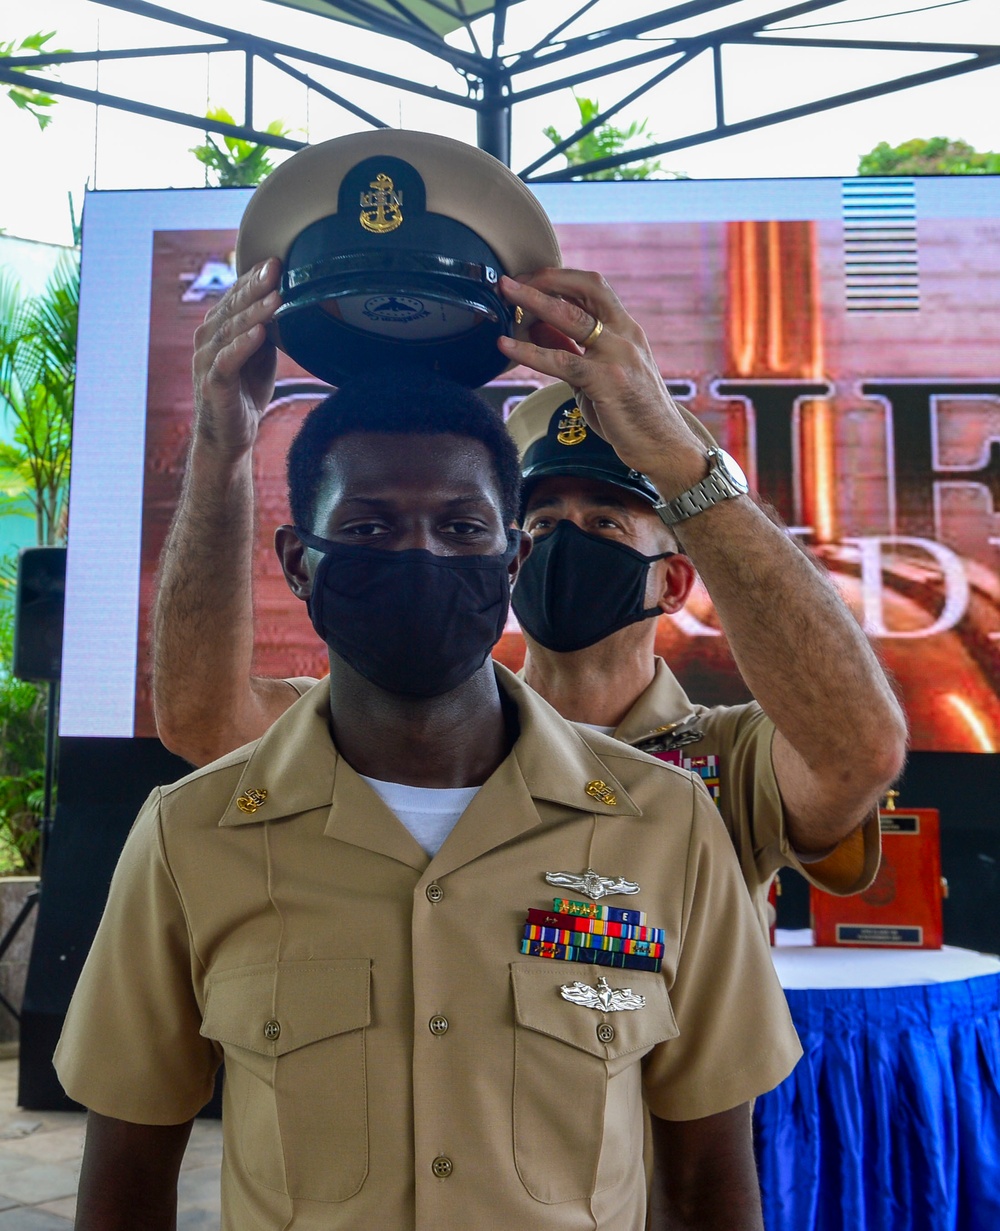 Newest Chief Petty Officers Pinned in Southeast Asia